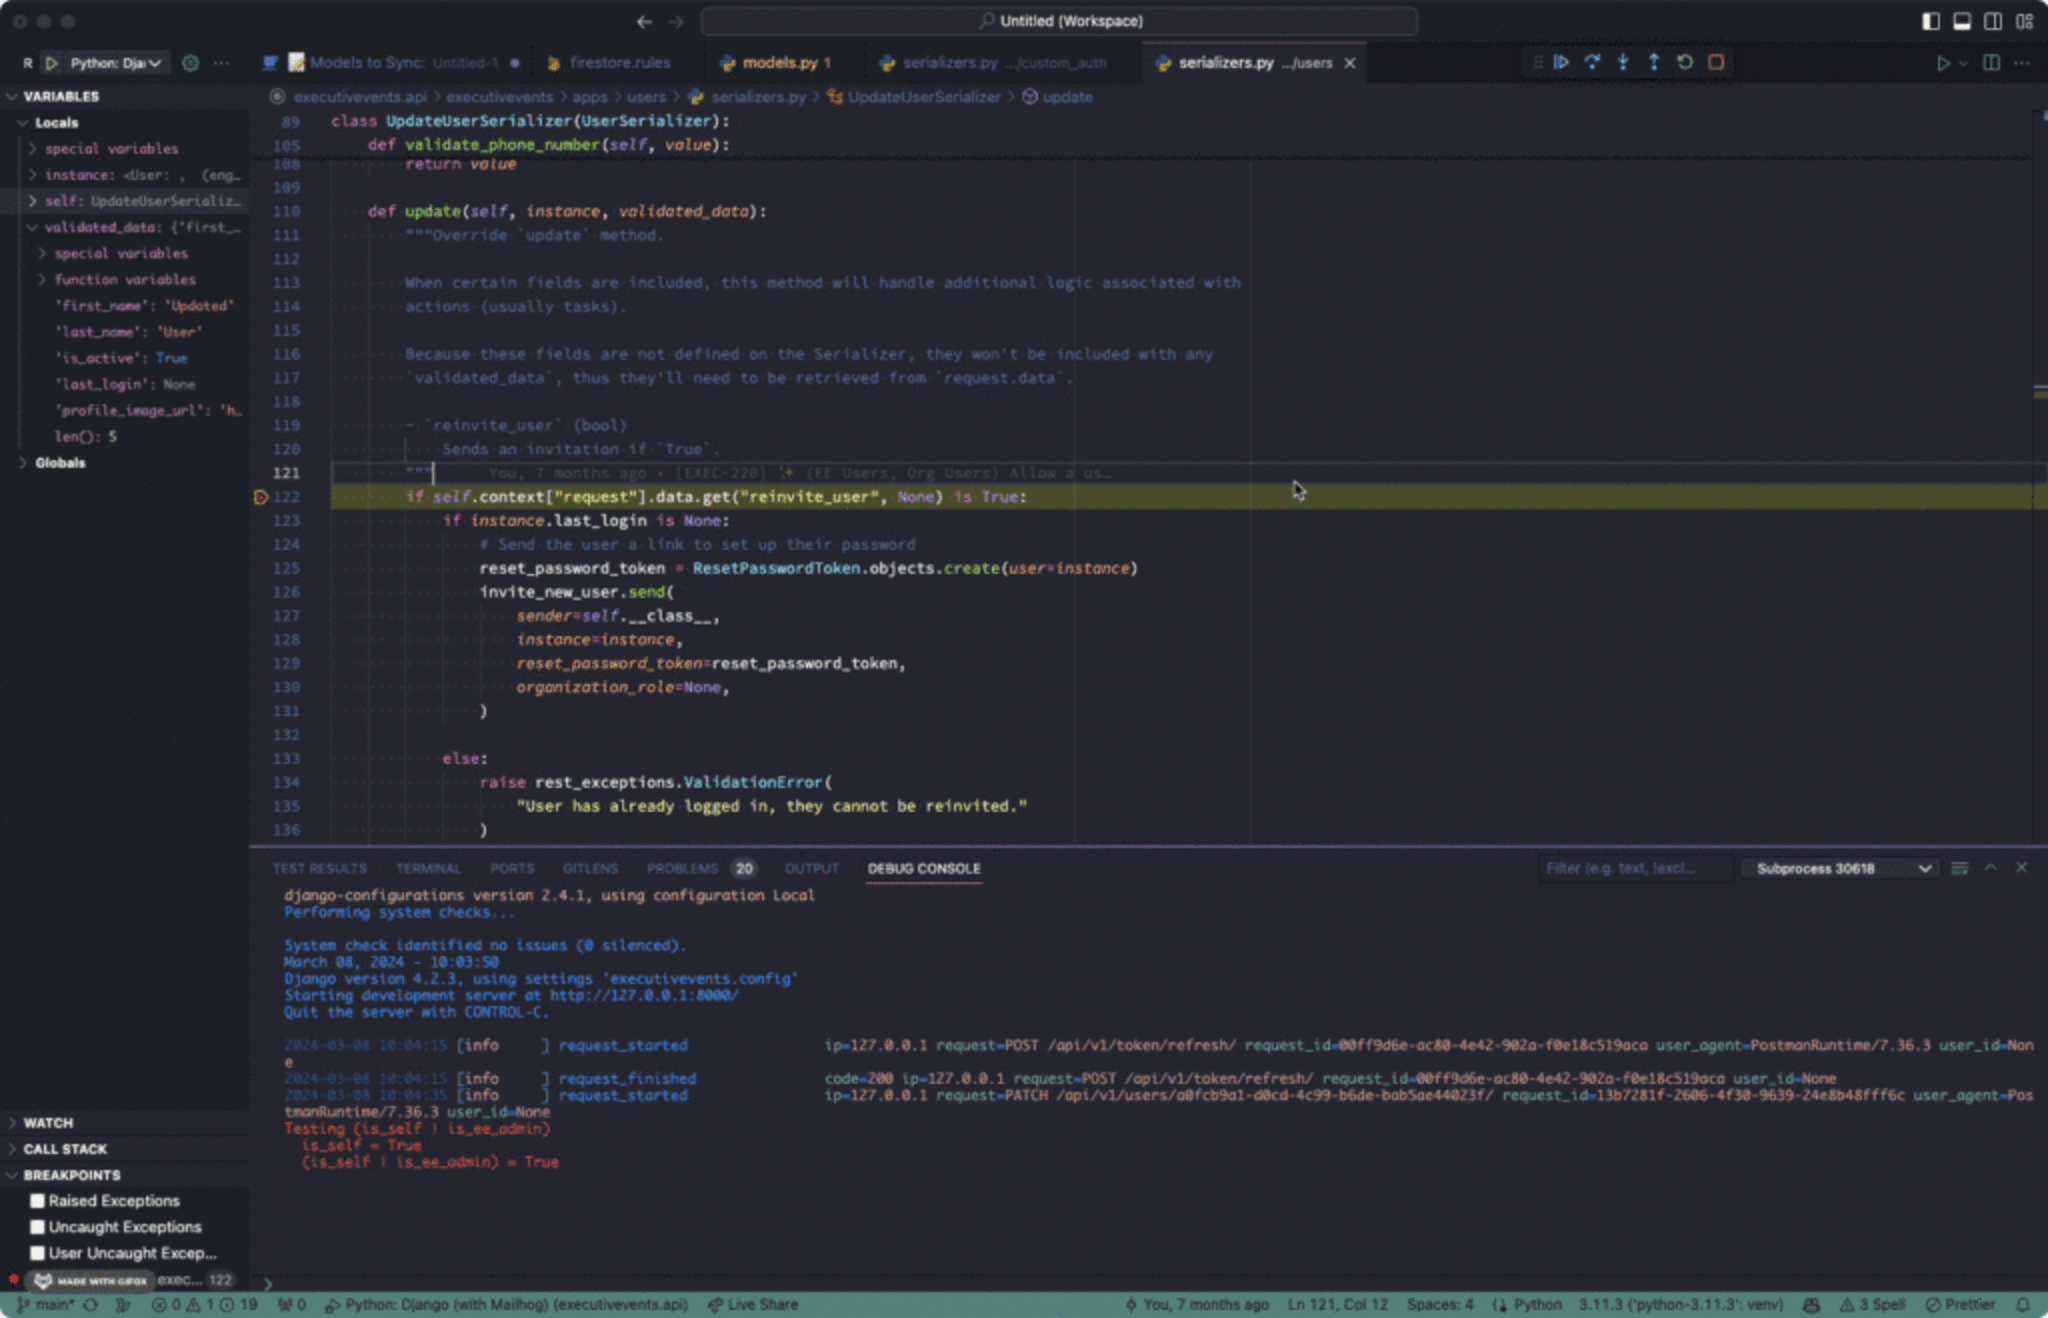 A screenshot of a code editor interface displaying Python code within a Django project, focused on a file named 'serializers.py'. The editor shows a class 'UpdateUserSerializer' with methods that include validation and update functionality. The theme of the editor is dark with code highlighted in different colors for readability. There is an output console at the bottom reporting on server status and recent requests, indicating that the development server is running. There are additional tabs and tools visible indicating that this is an Integrated Development Environment (IDE) with multiple features such as debugging and version control.